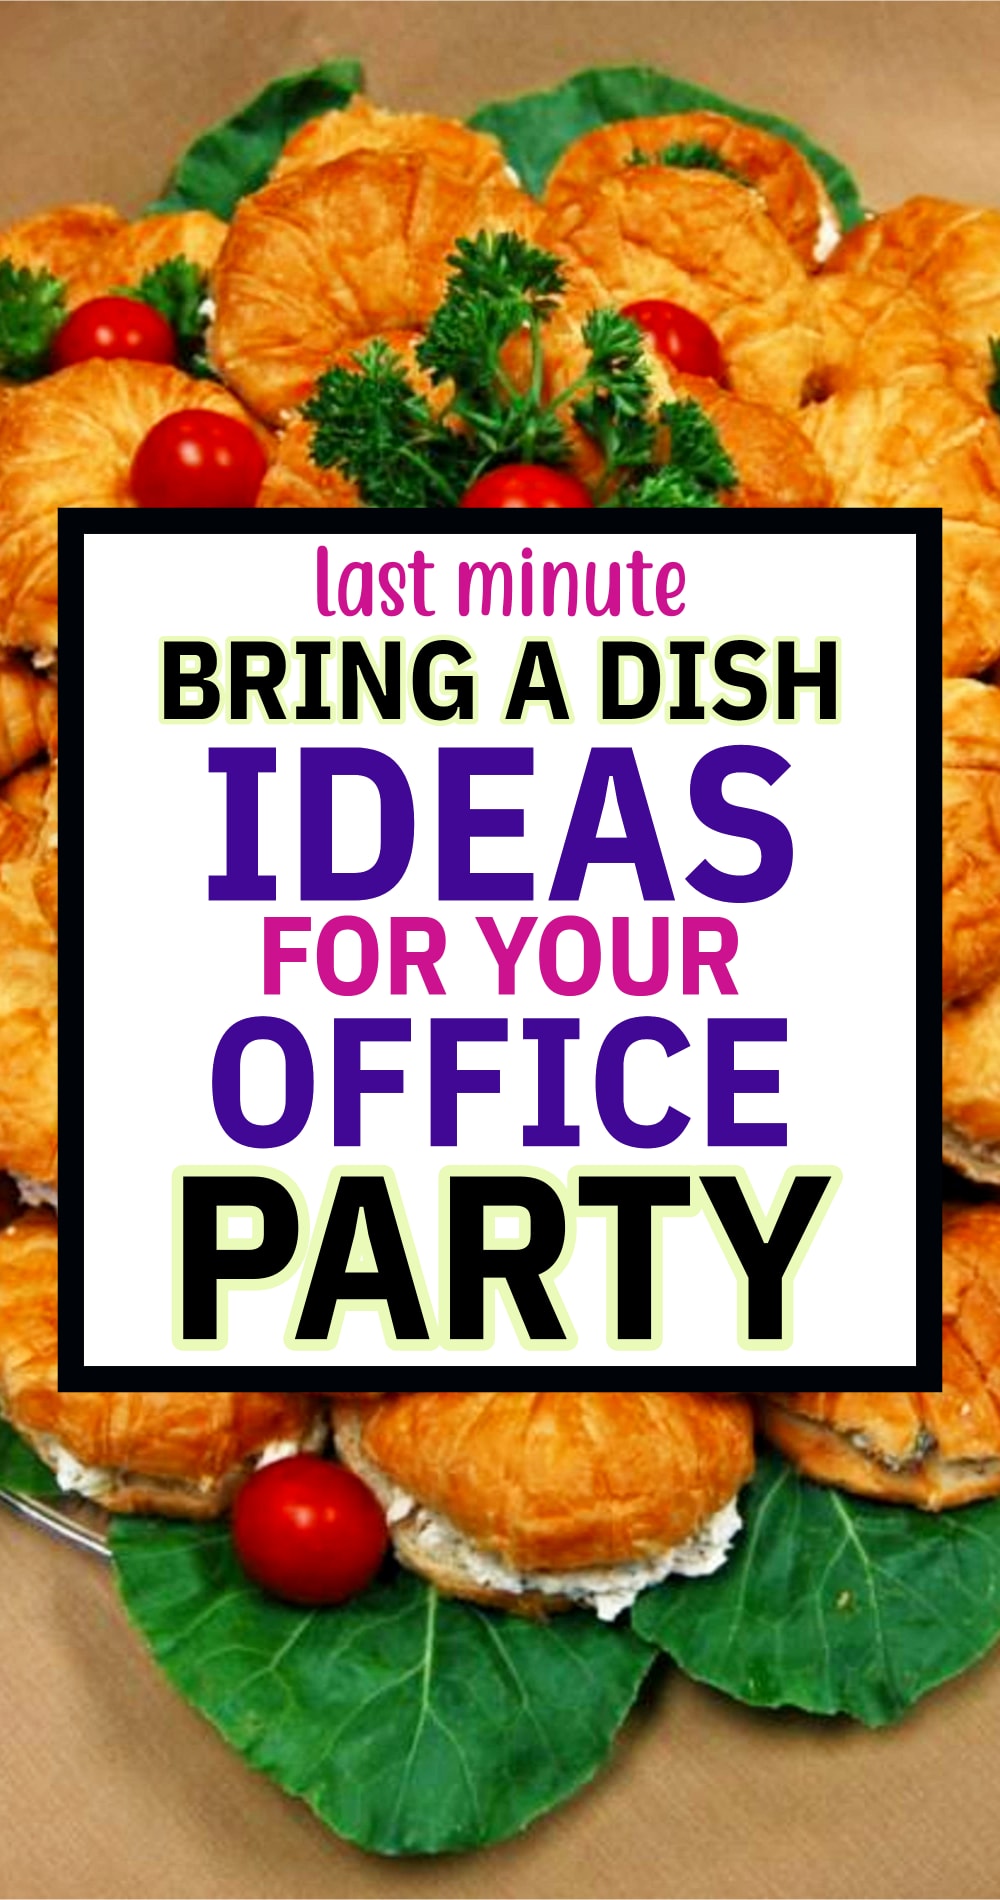 bring a dish ideas for work office party